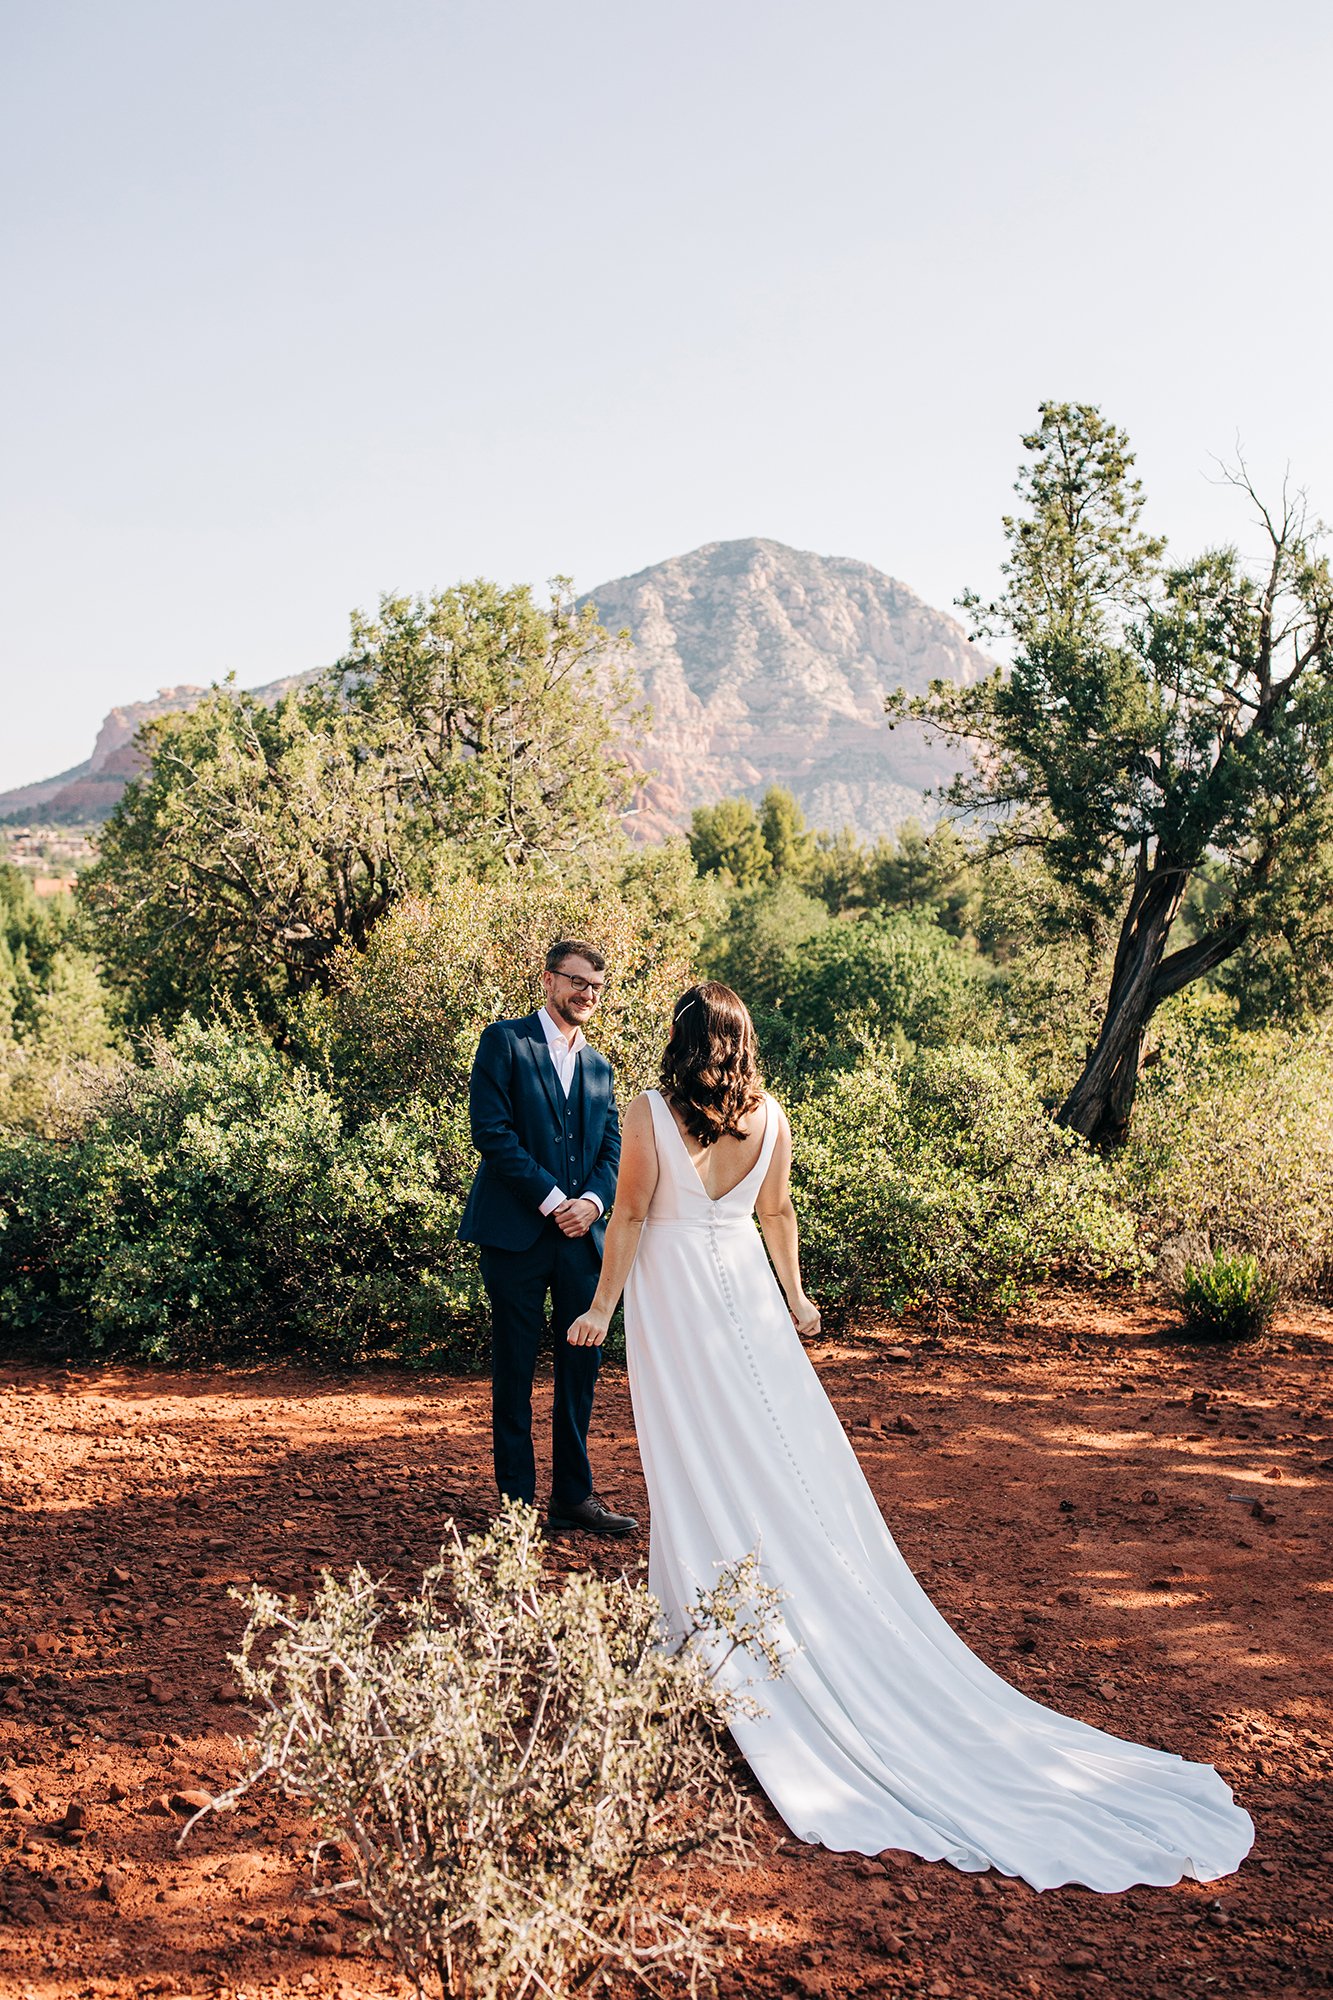 Stephanie and Matthew share a first look moment amongst trees and red rocks. 